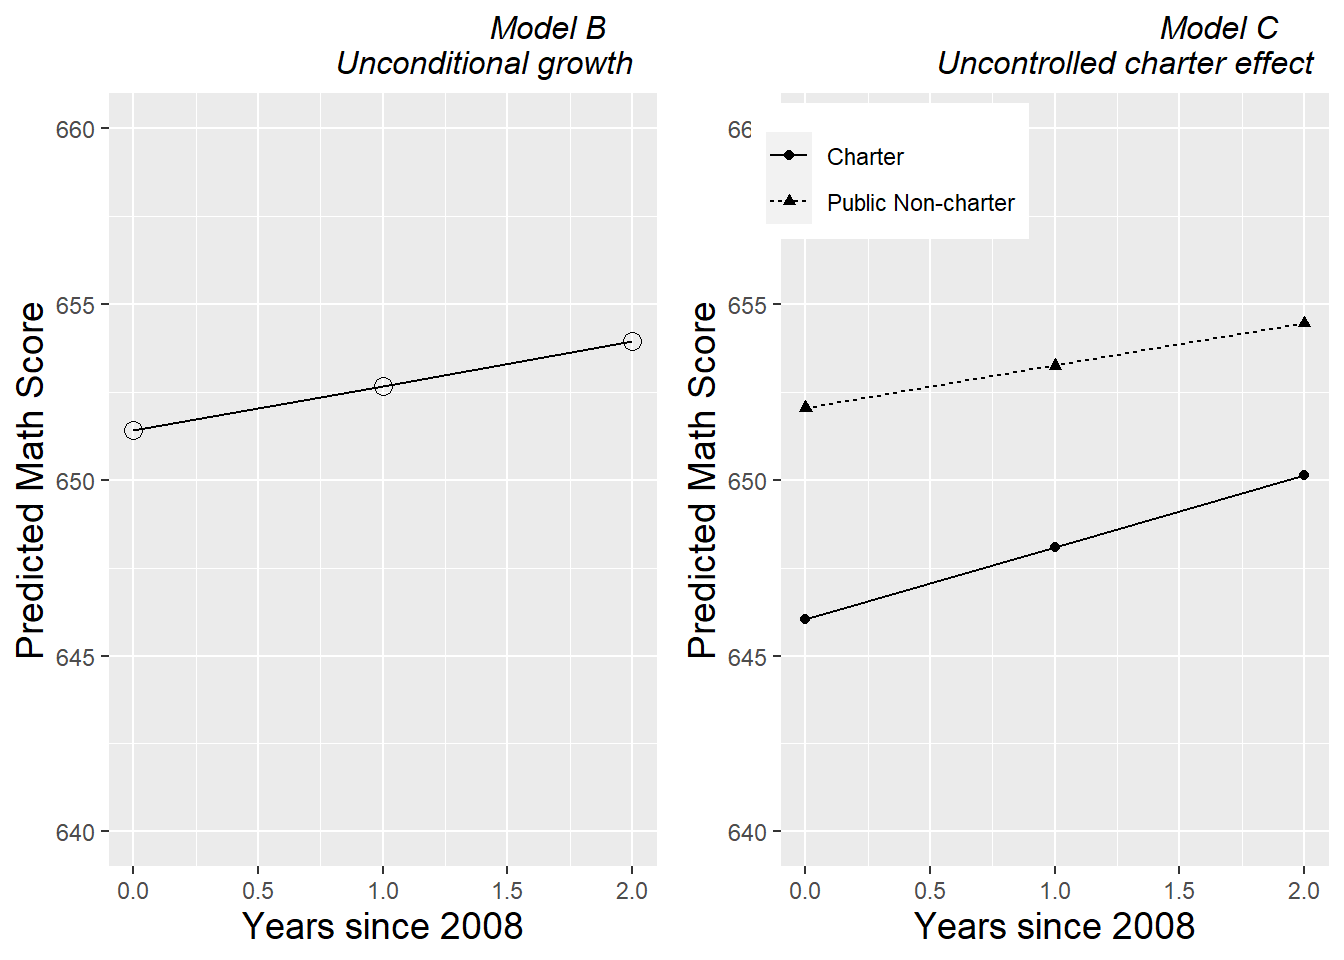  Fitted growth curves for Models B and C.